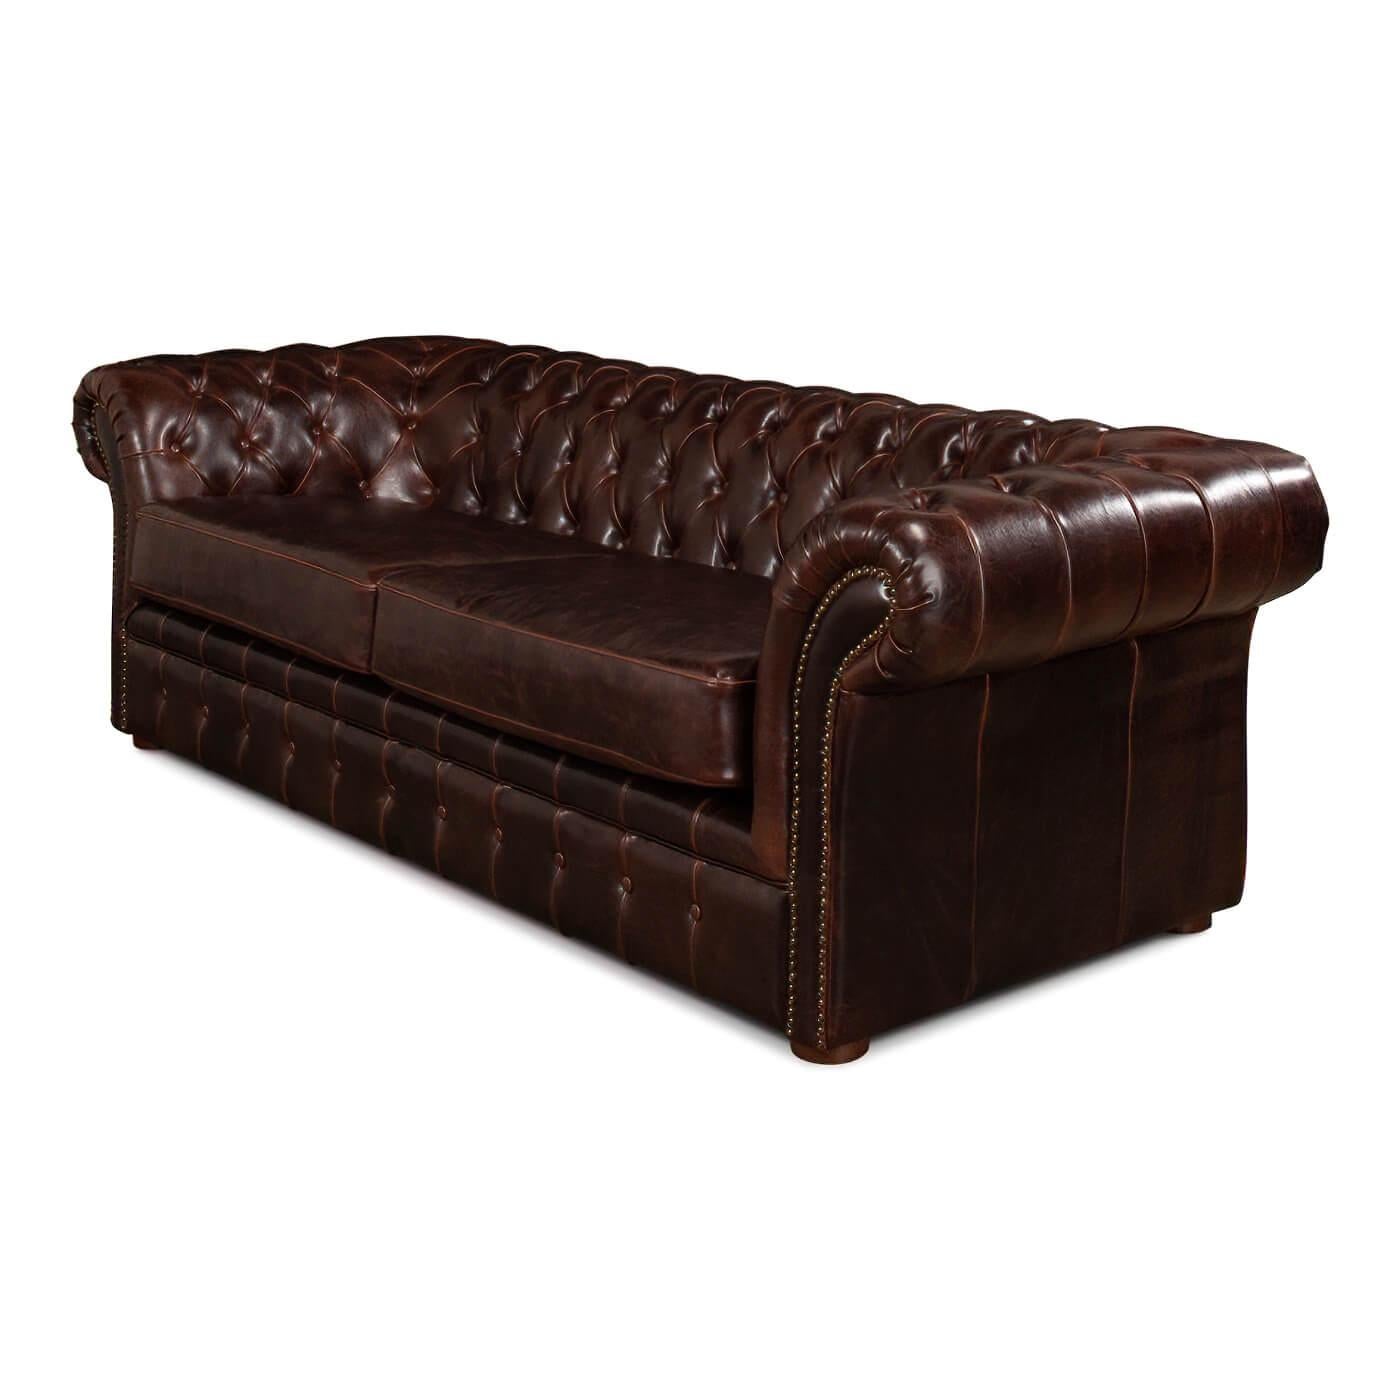 Asian Tufted Leather Chesterfield Sofa For Sale